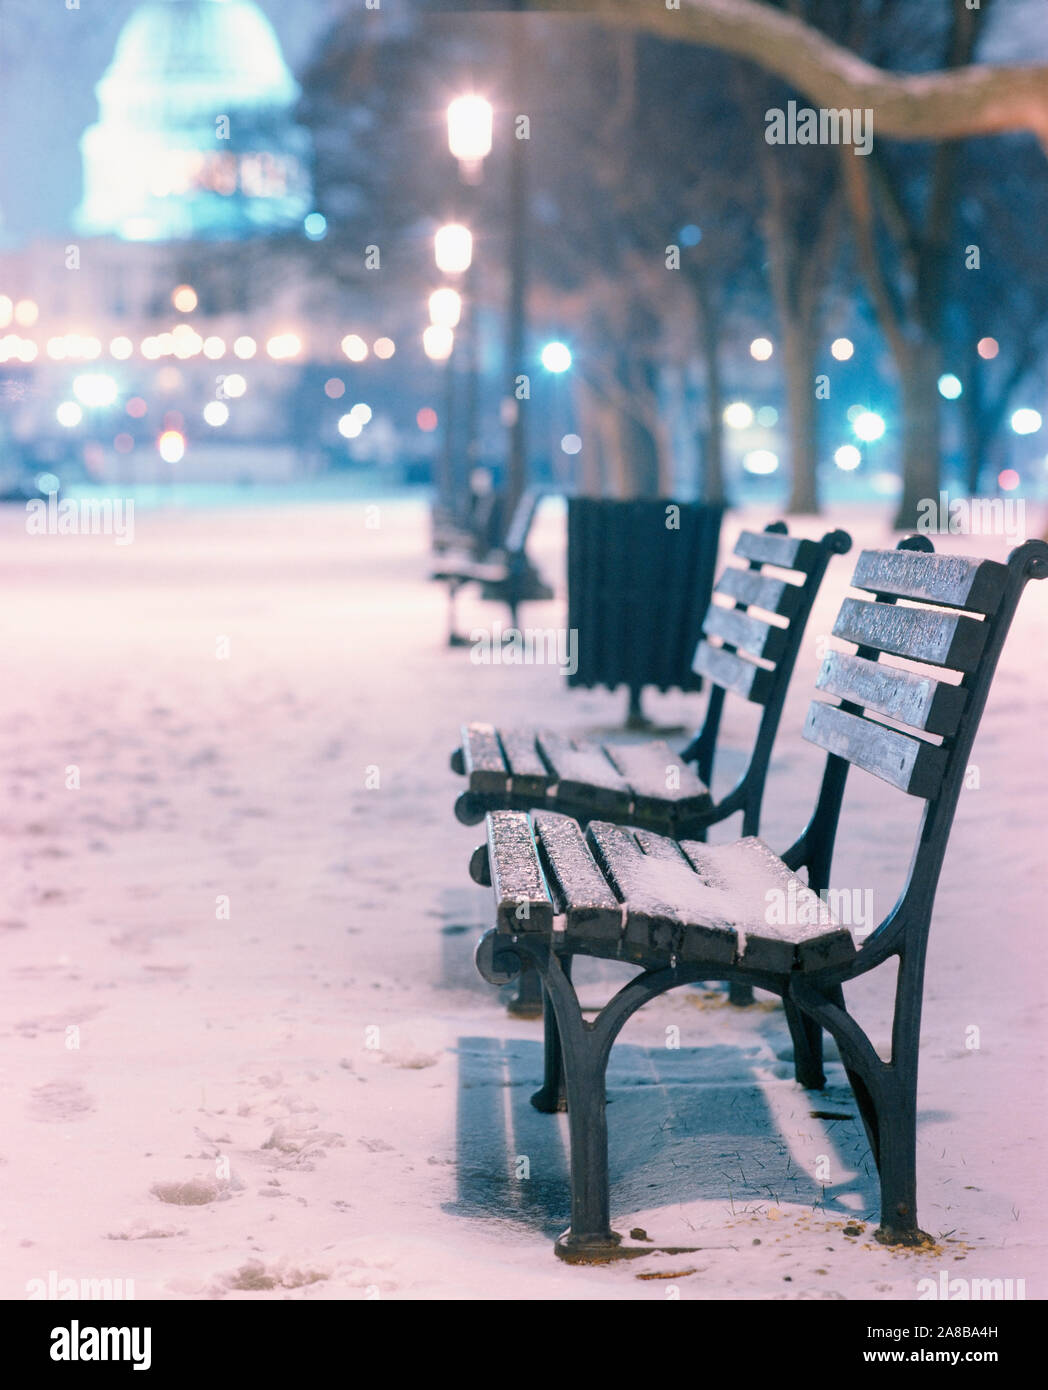 Snow covered benches along a foorpath, US Capitol Building in background, Washington DC, USA Stock Photo